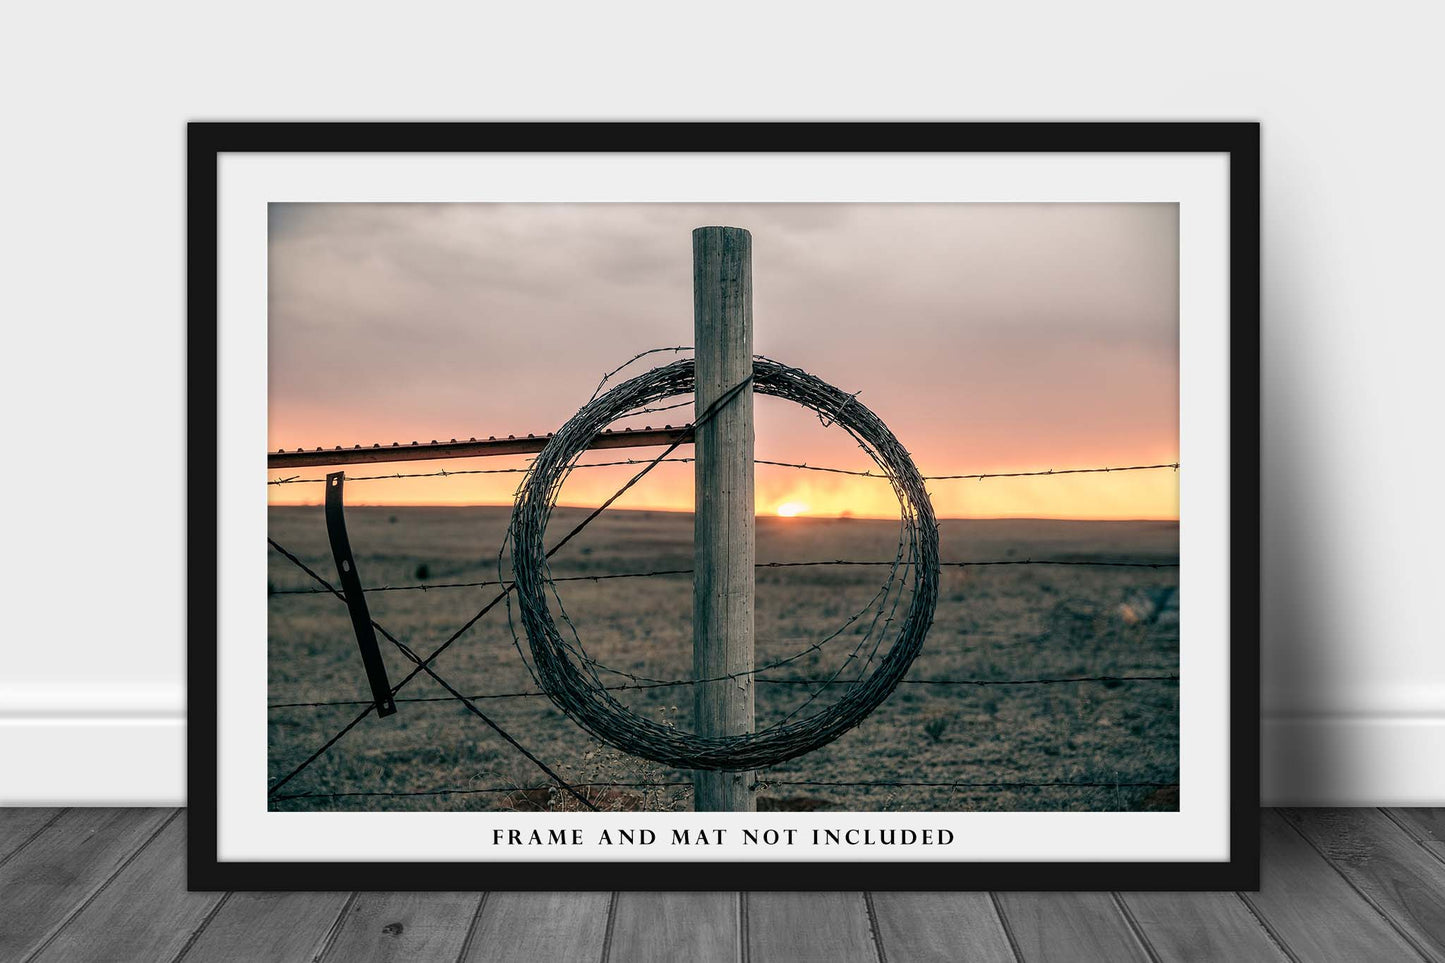 Western Photography Print - Picture of Rolled Up Barbed Wire on a Fence Post at Sunset in Oklahoma - Rustic Country Wall Art Photo Artwork